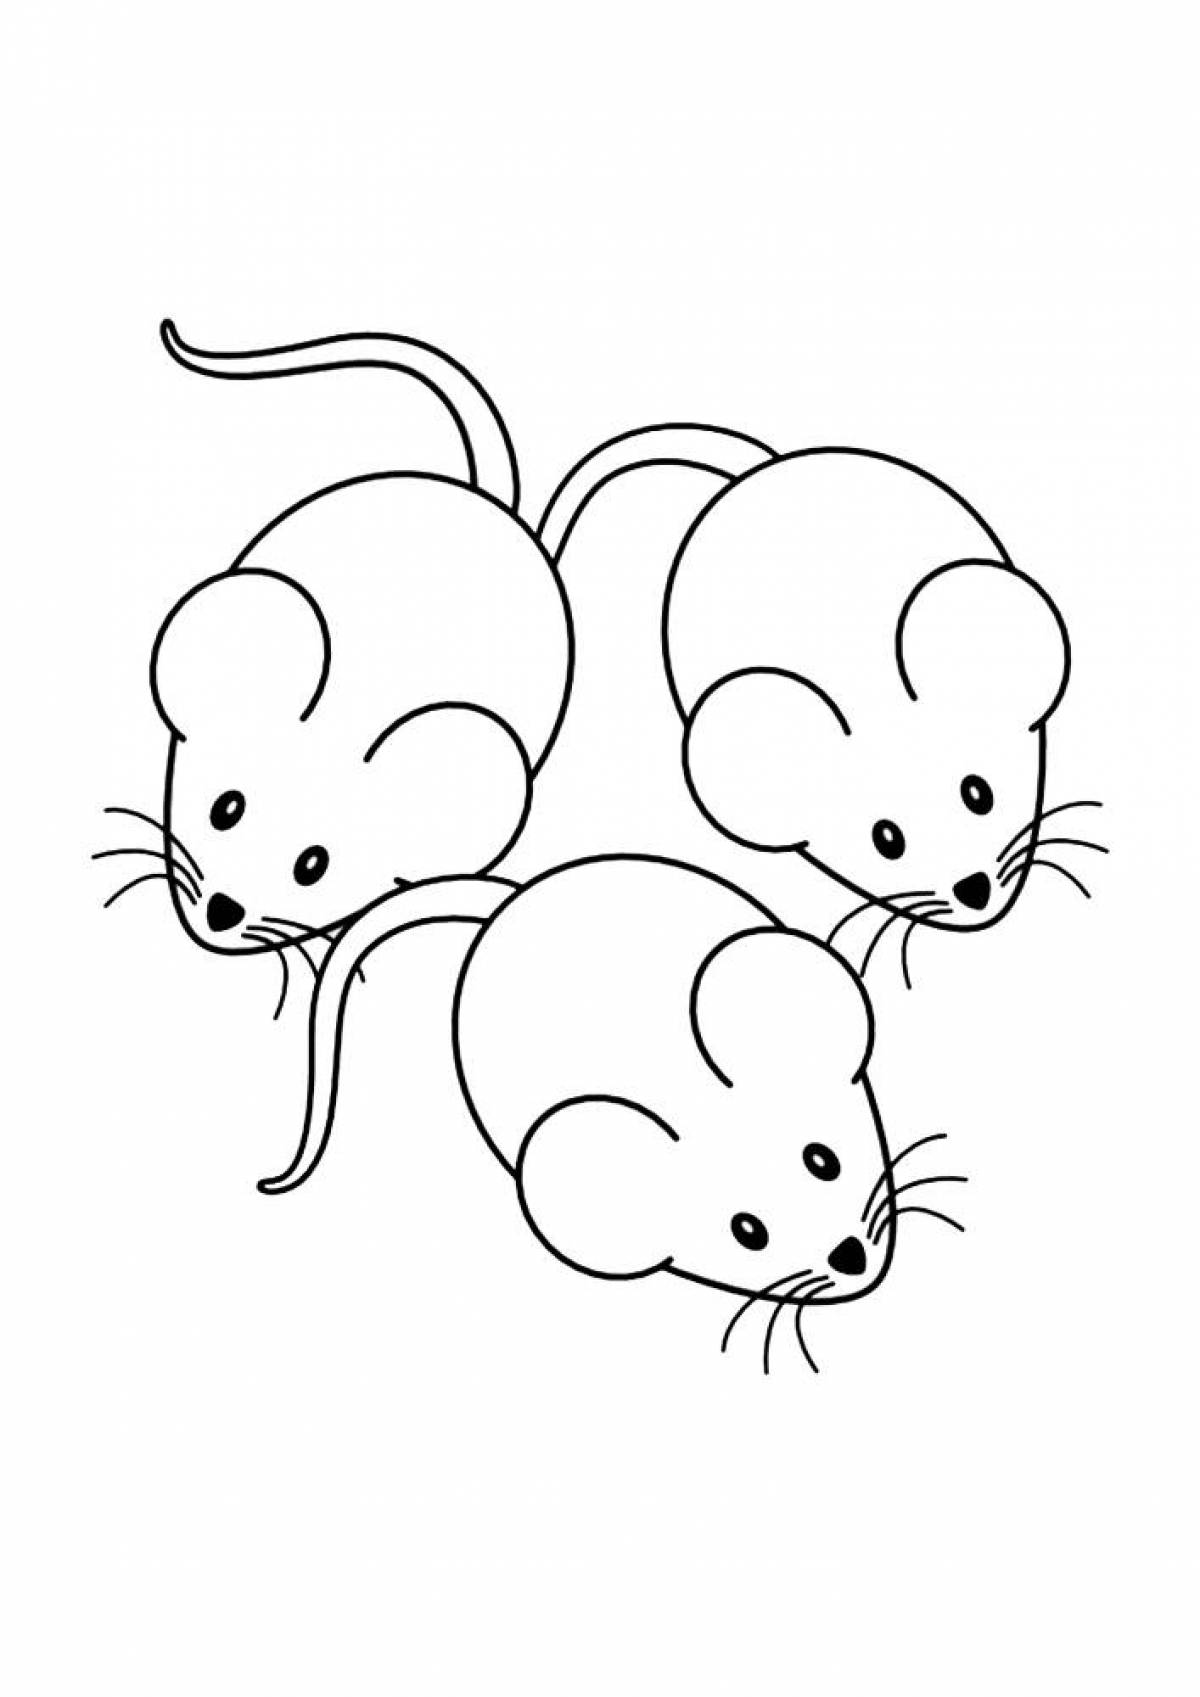 Adorable little mouse coloring book